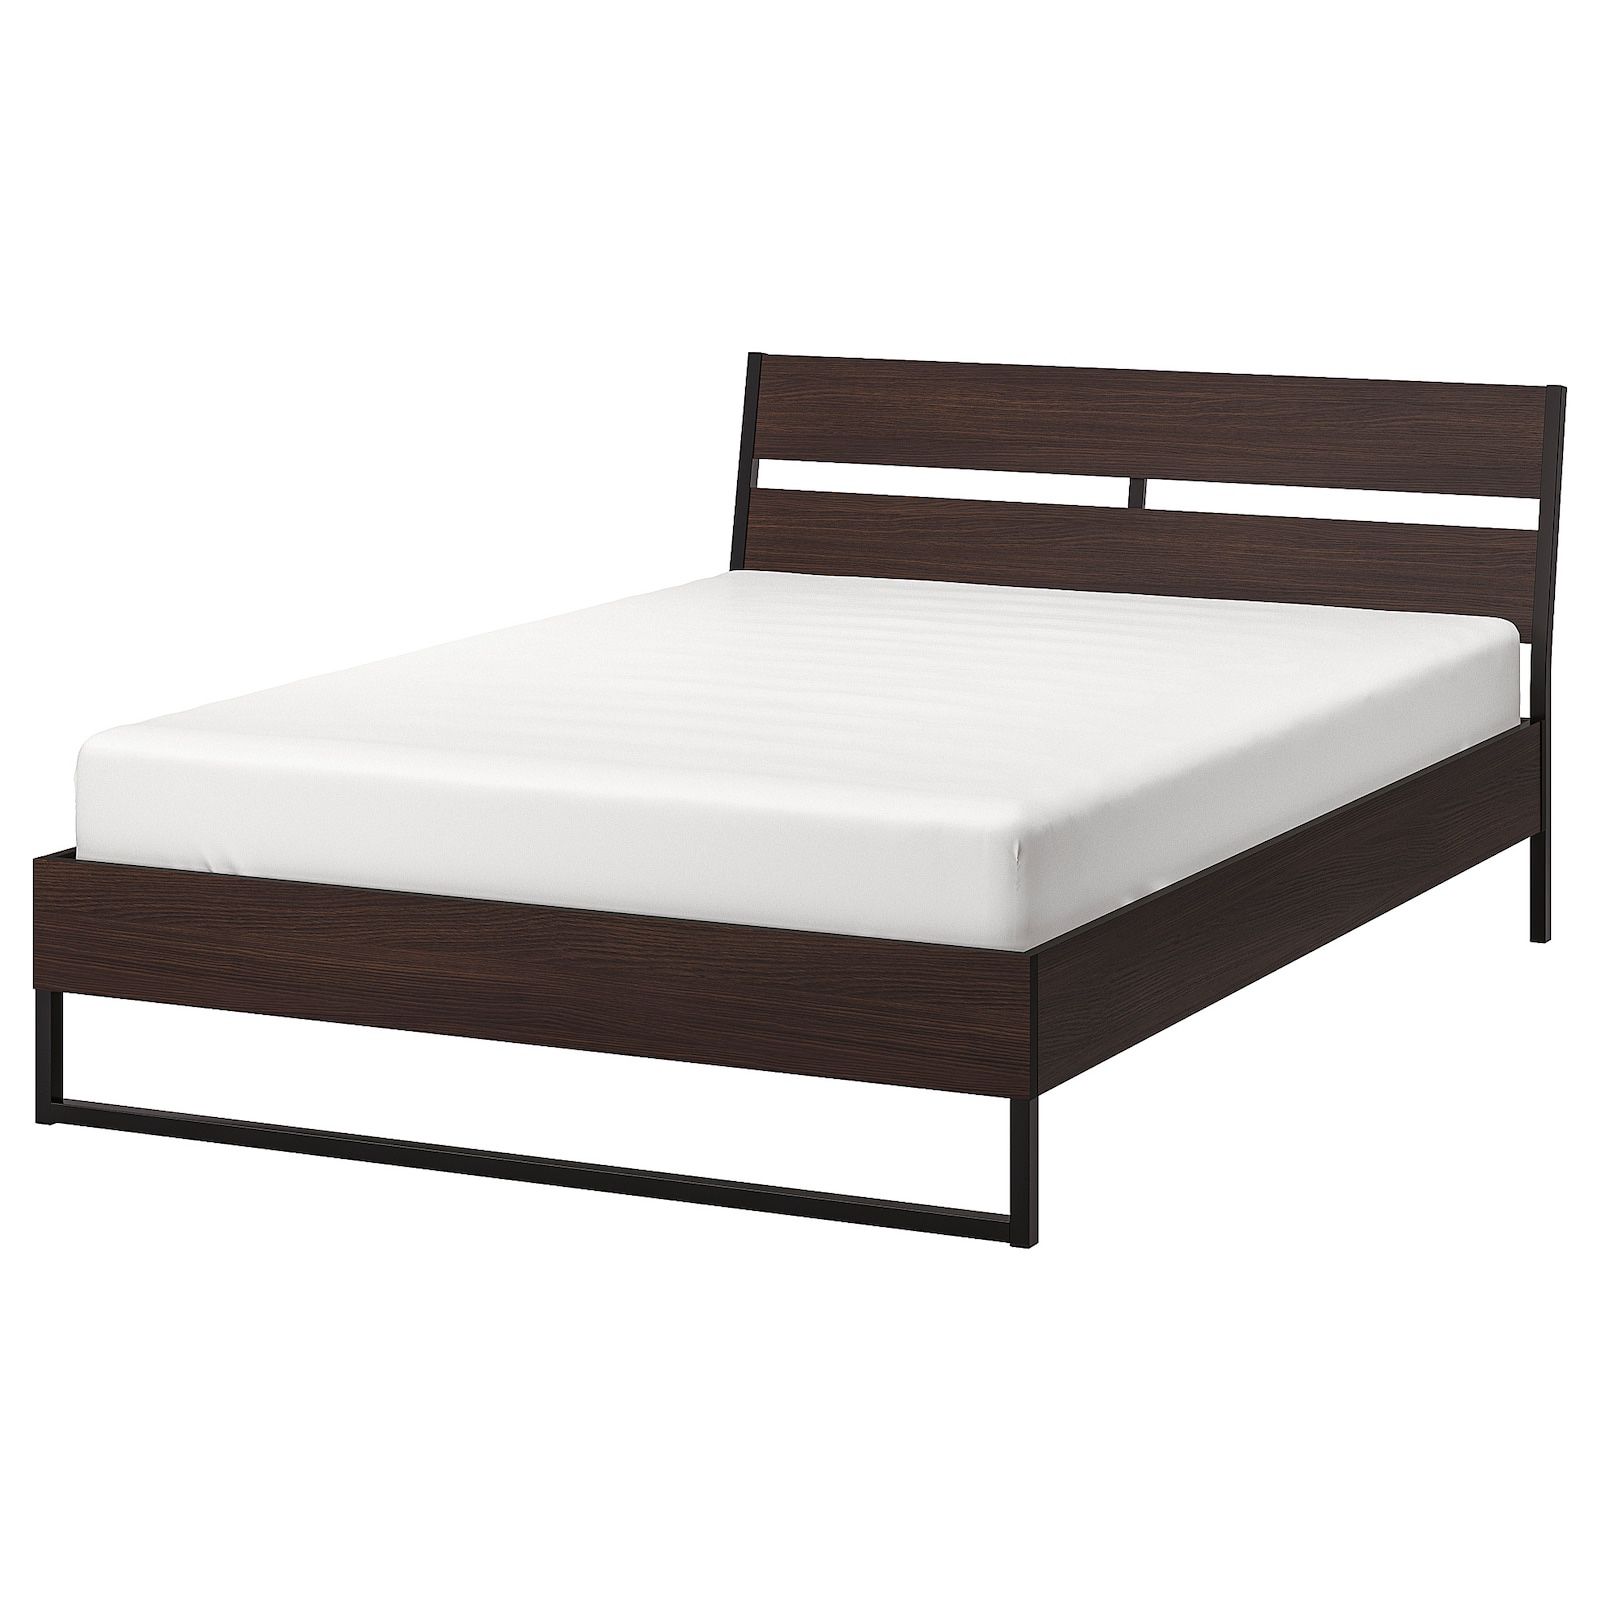 Queen bed frame + 2 night stands - IKEA Trysil